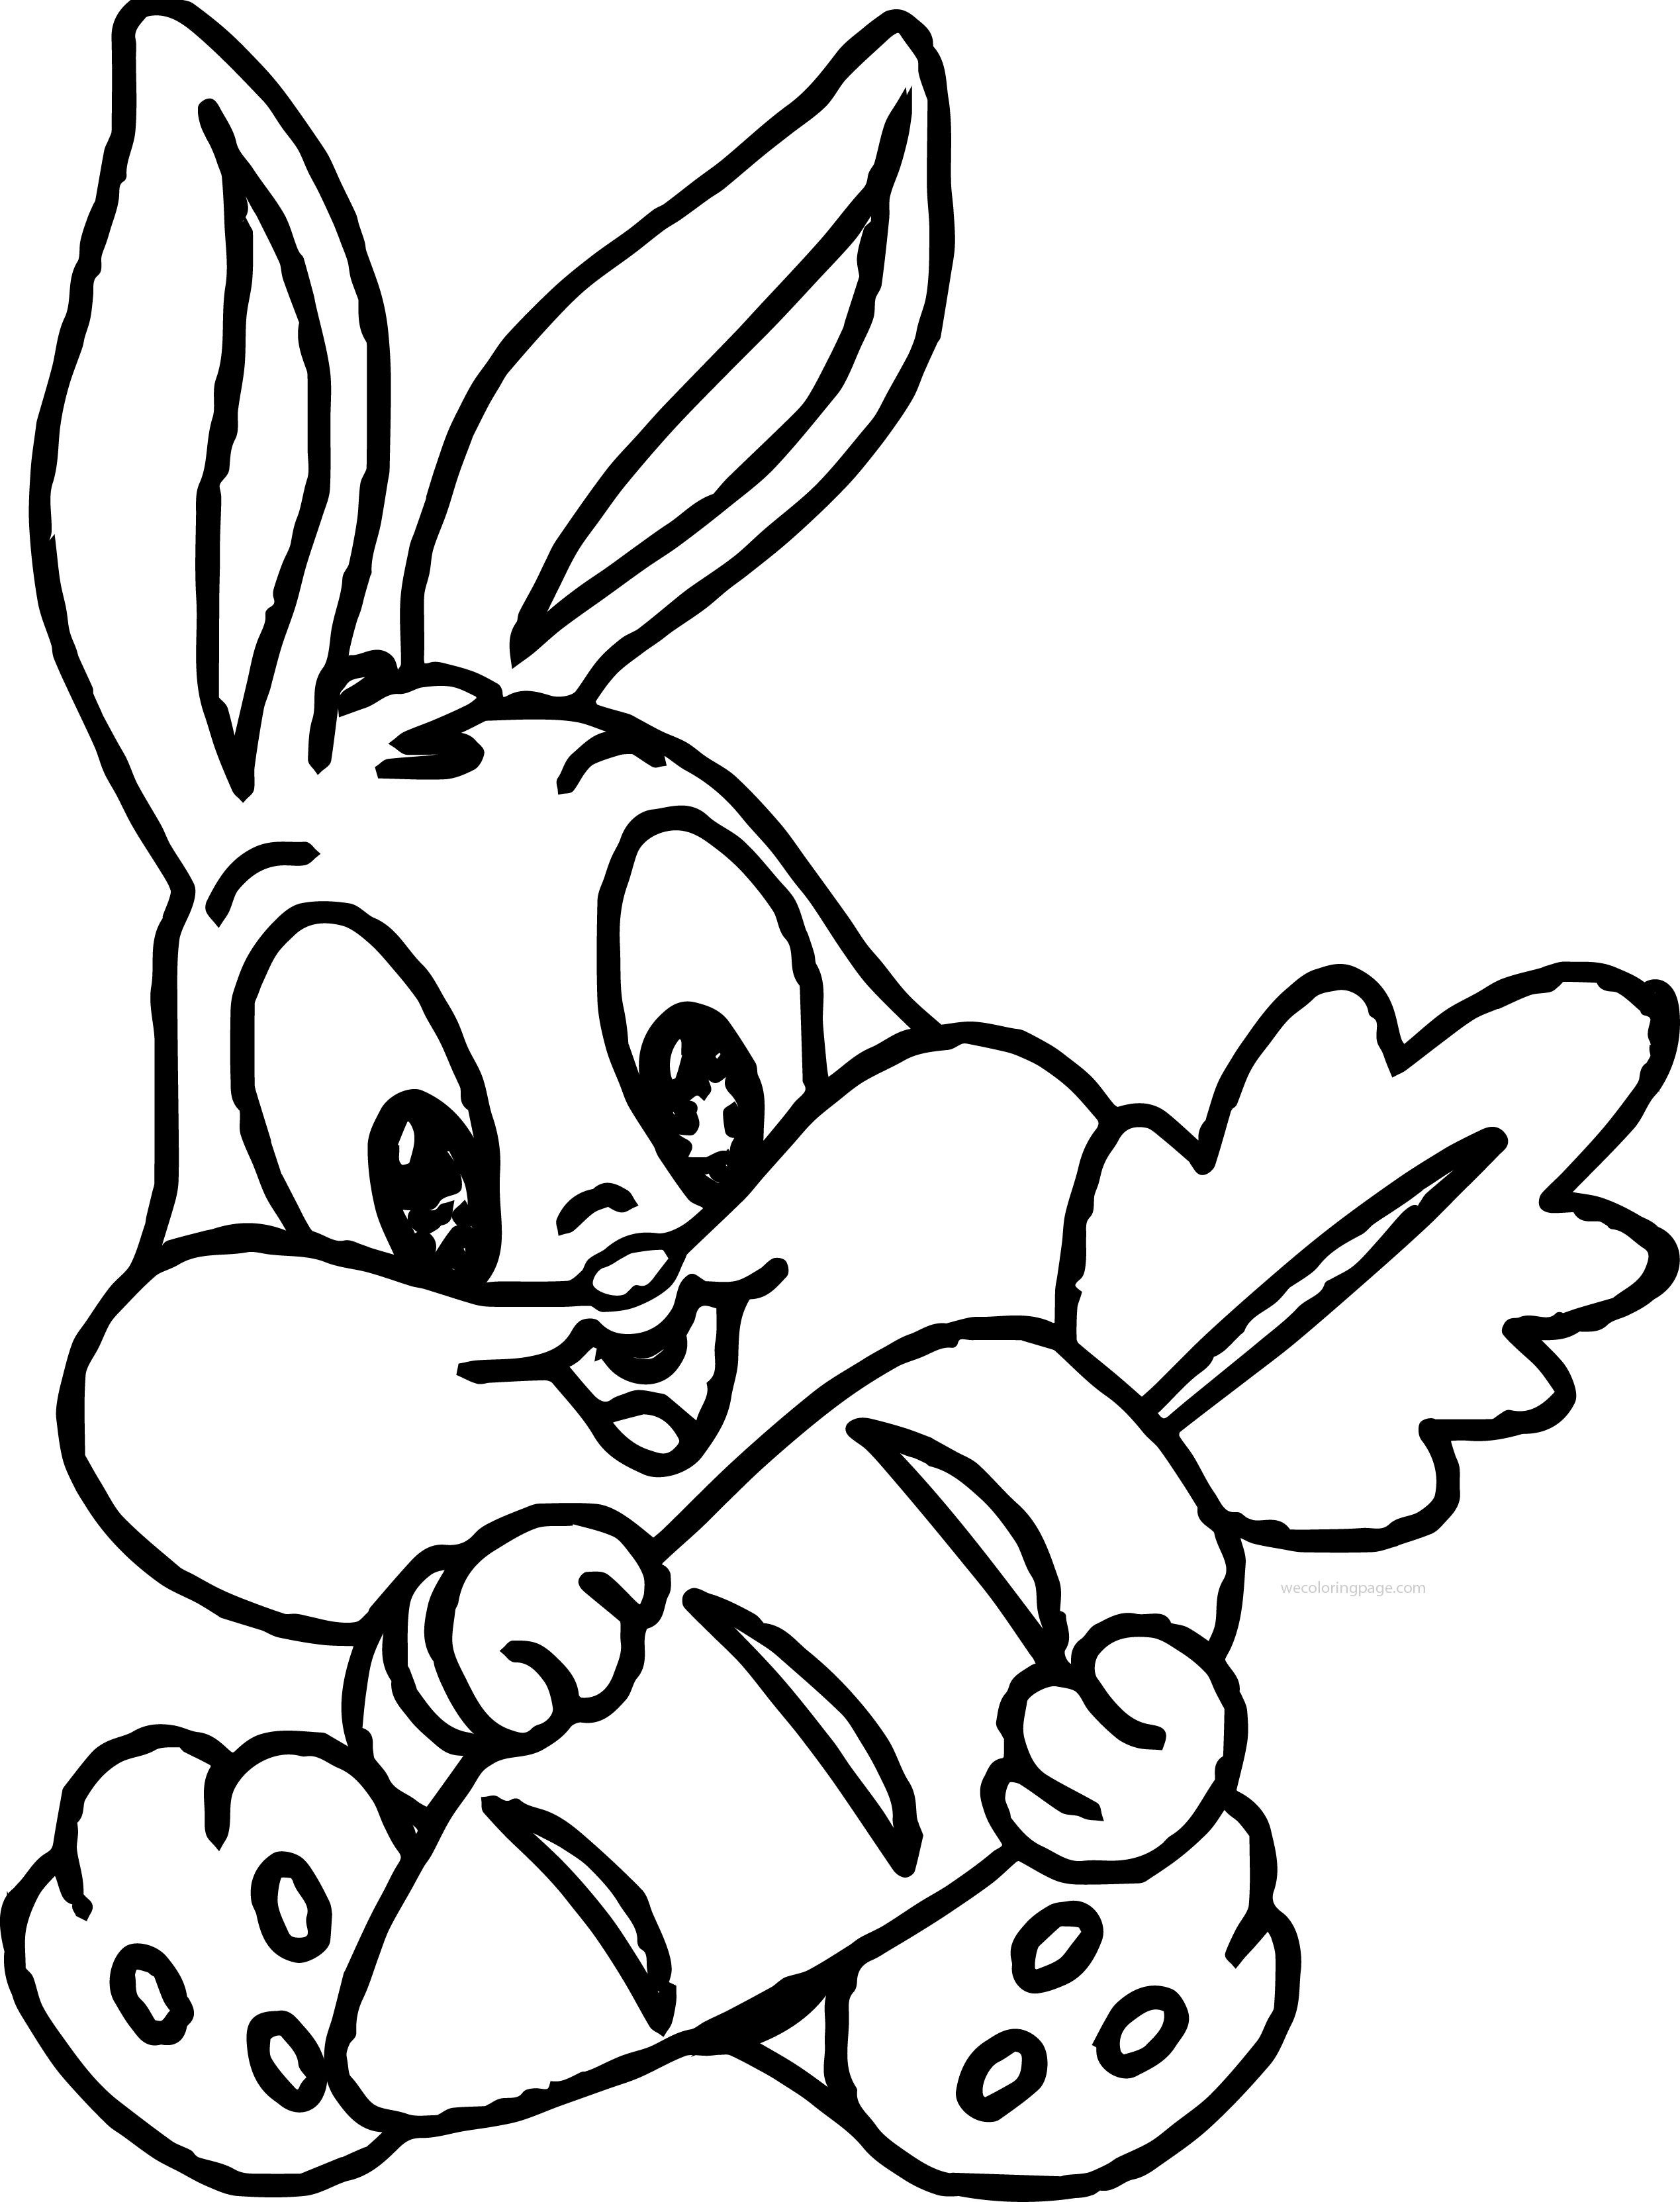 Creepy Bunny Drawing | Free download on ClipArtMag